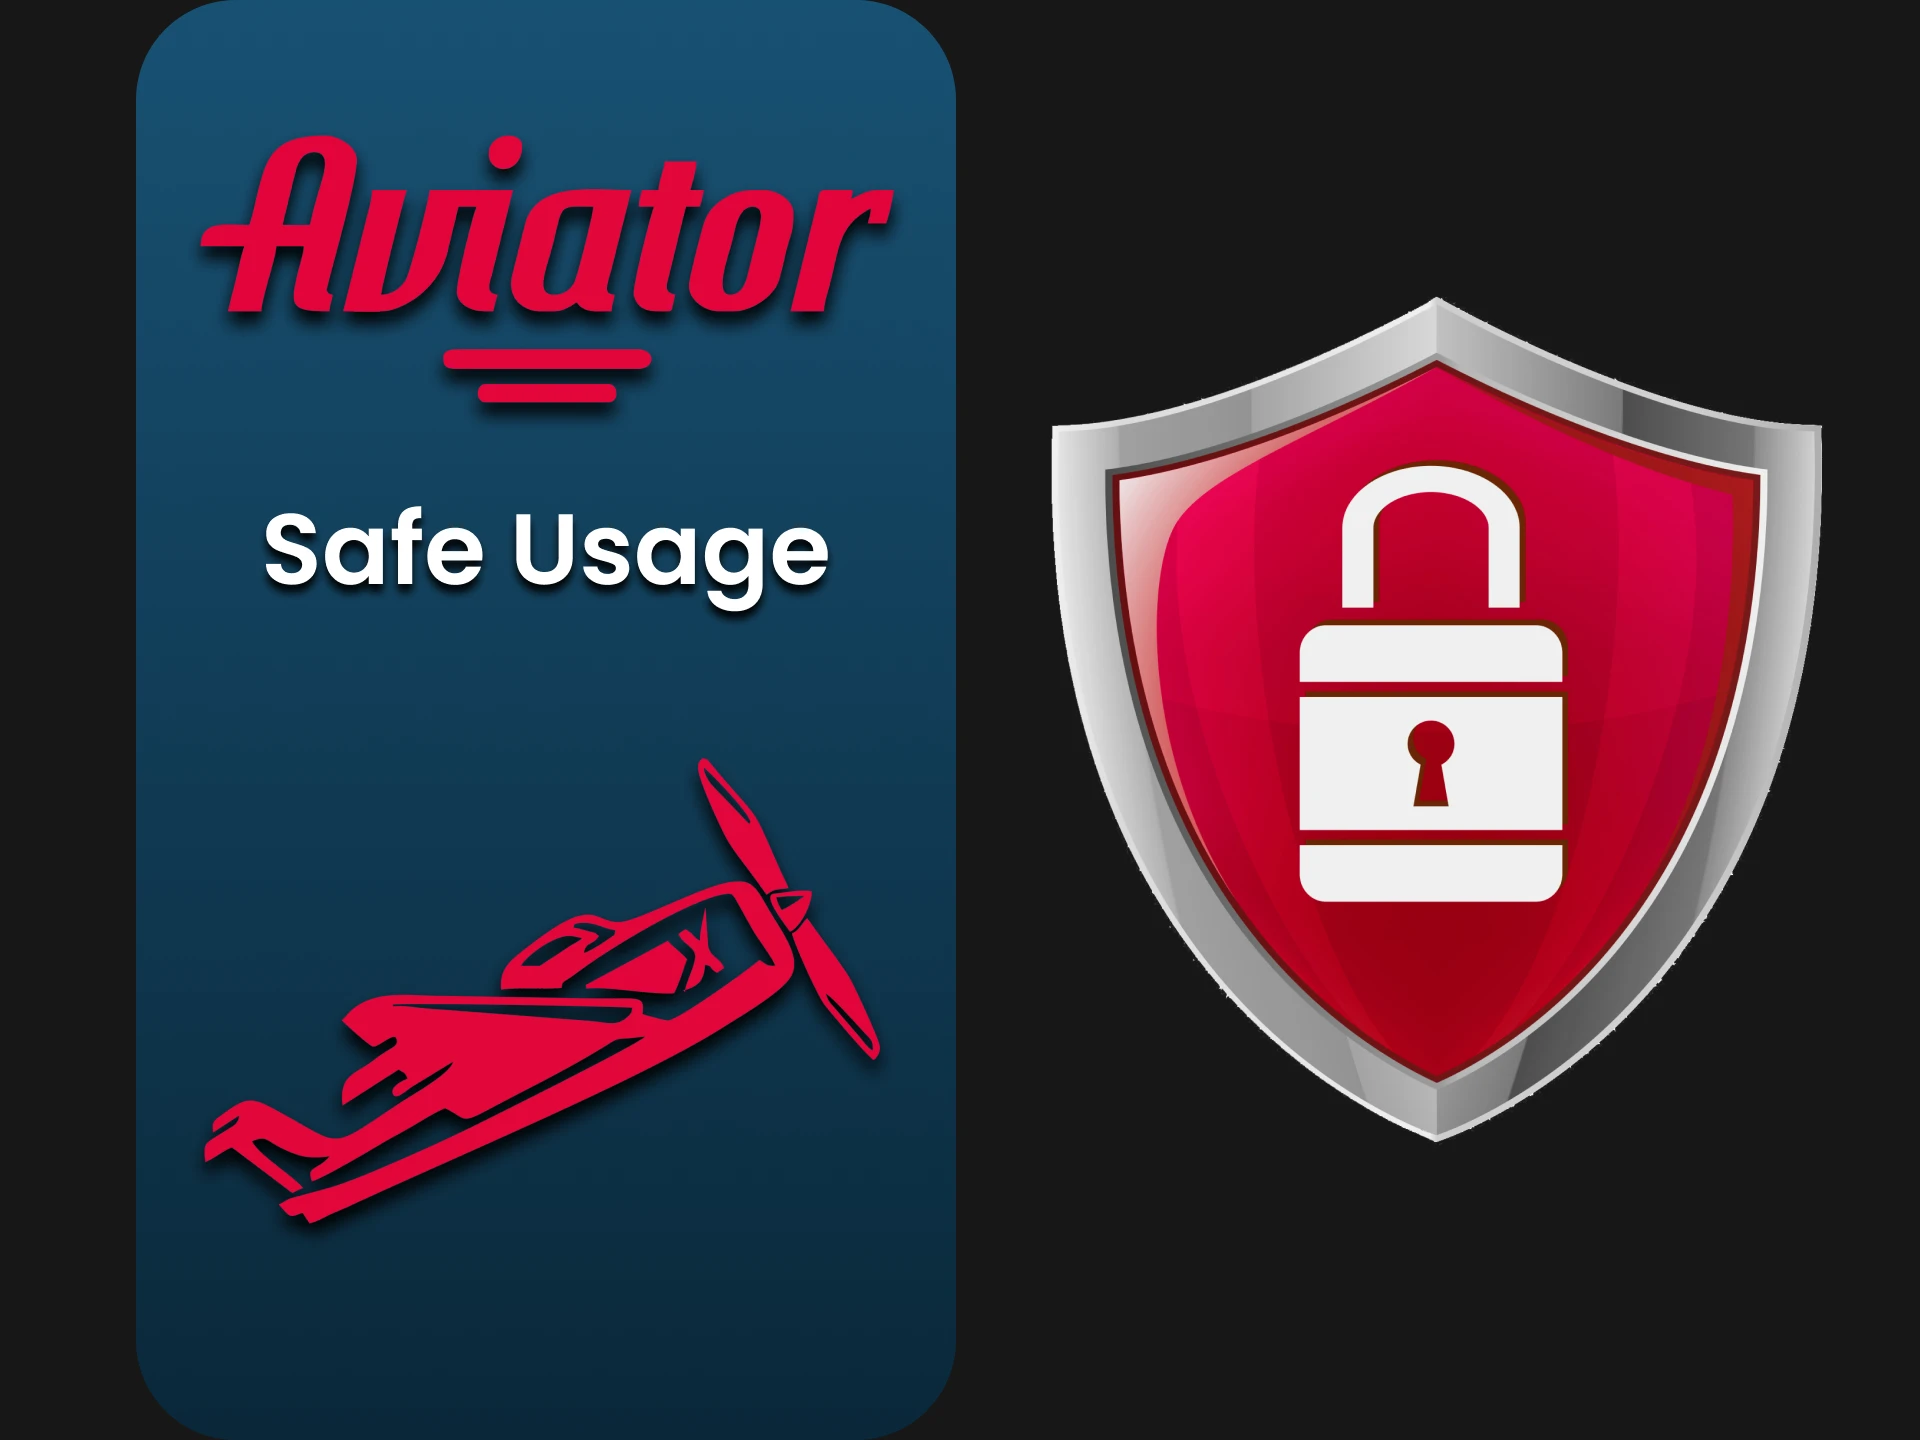 Find out how to safely use Predictor for Aviator.